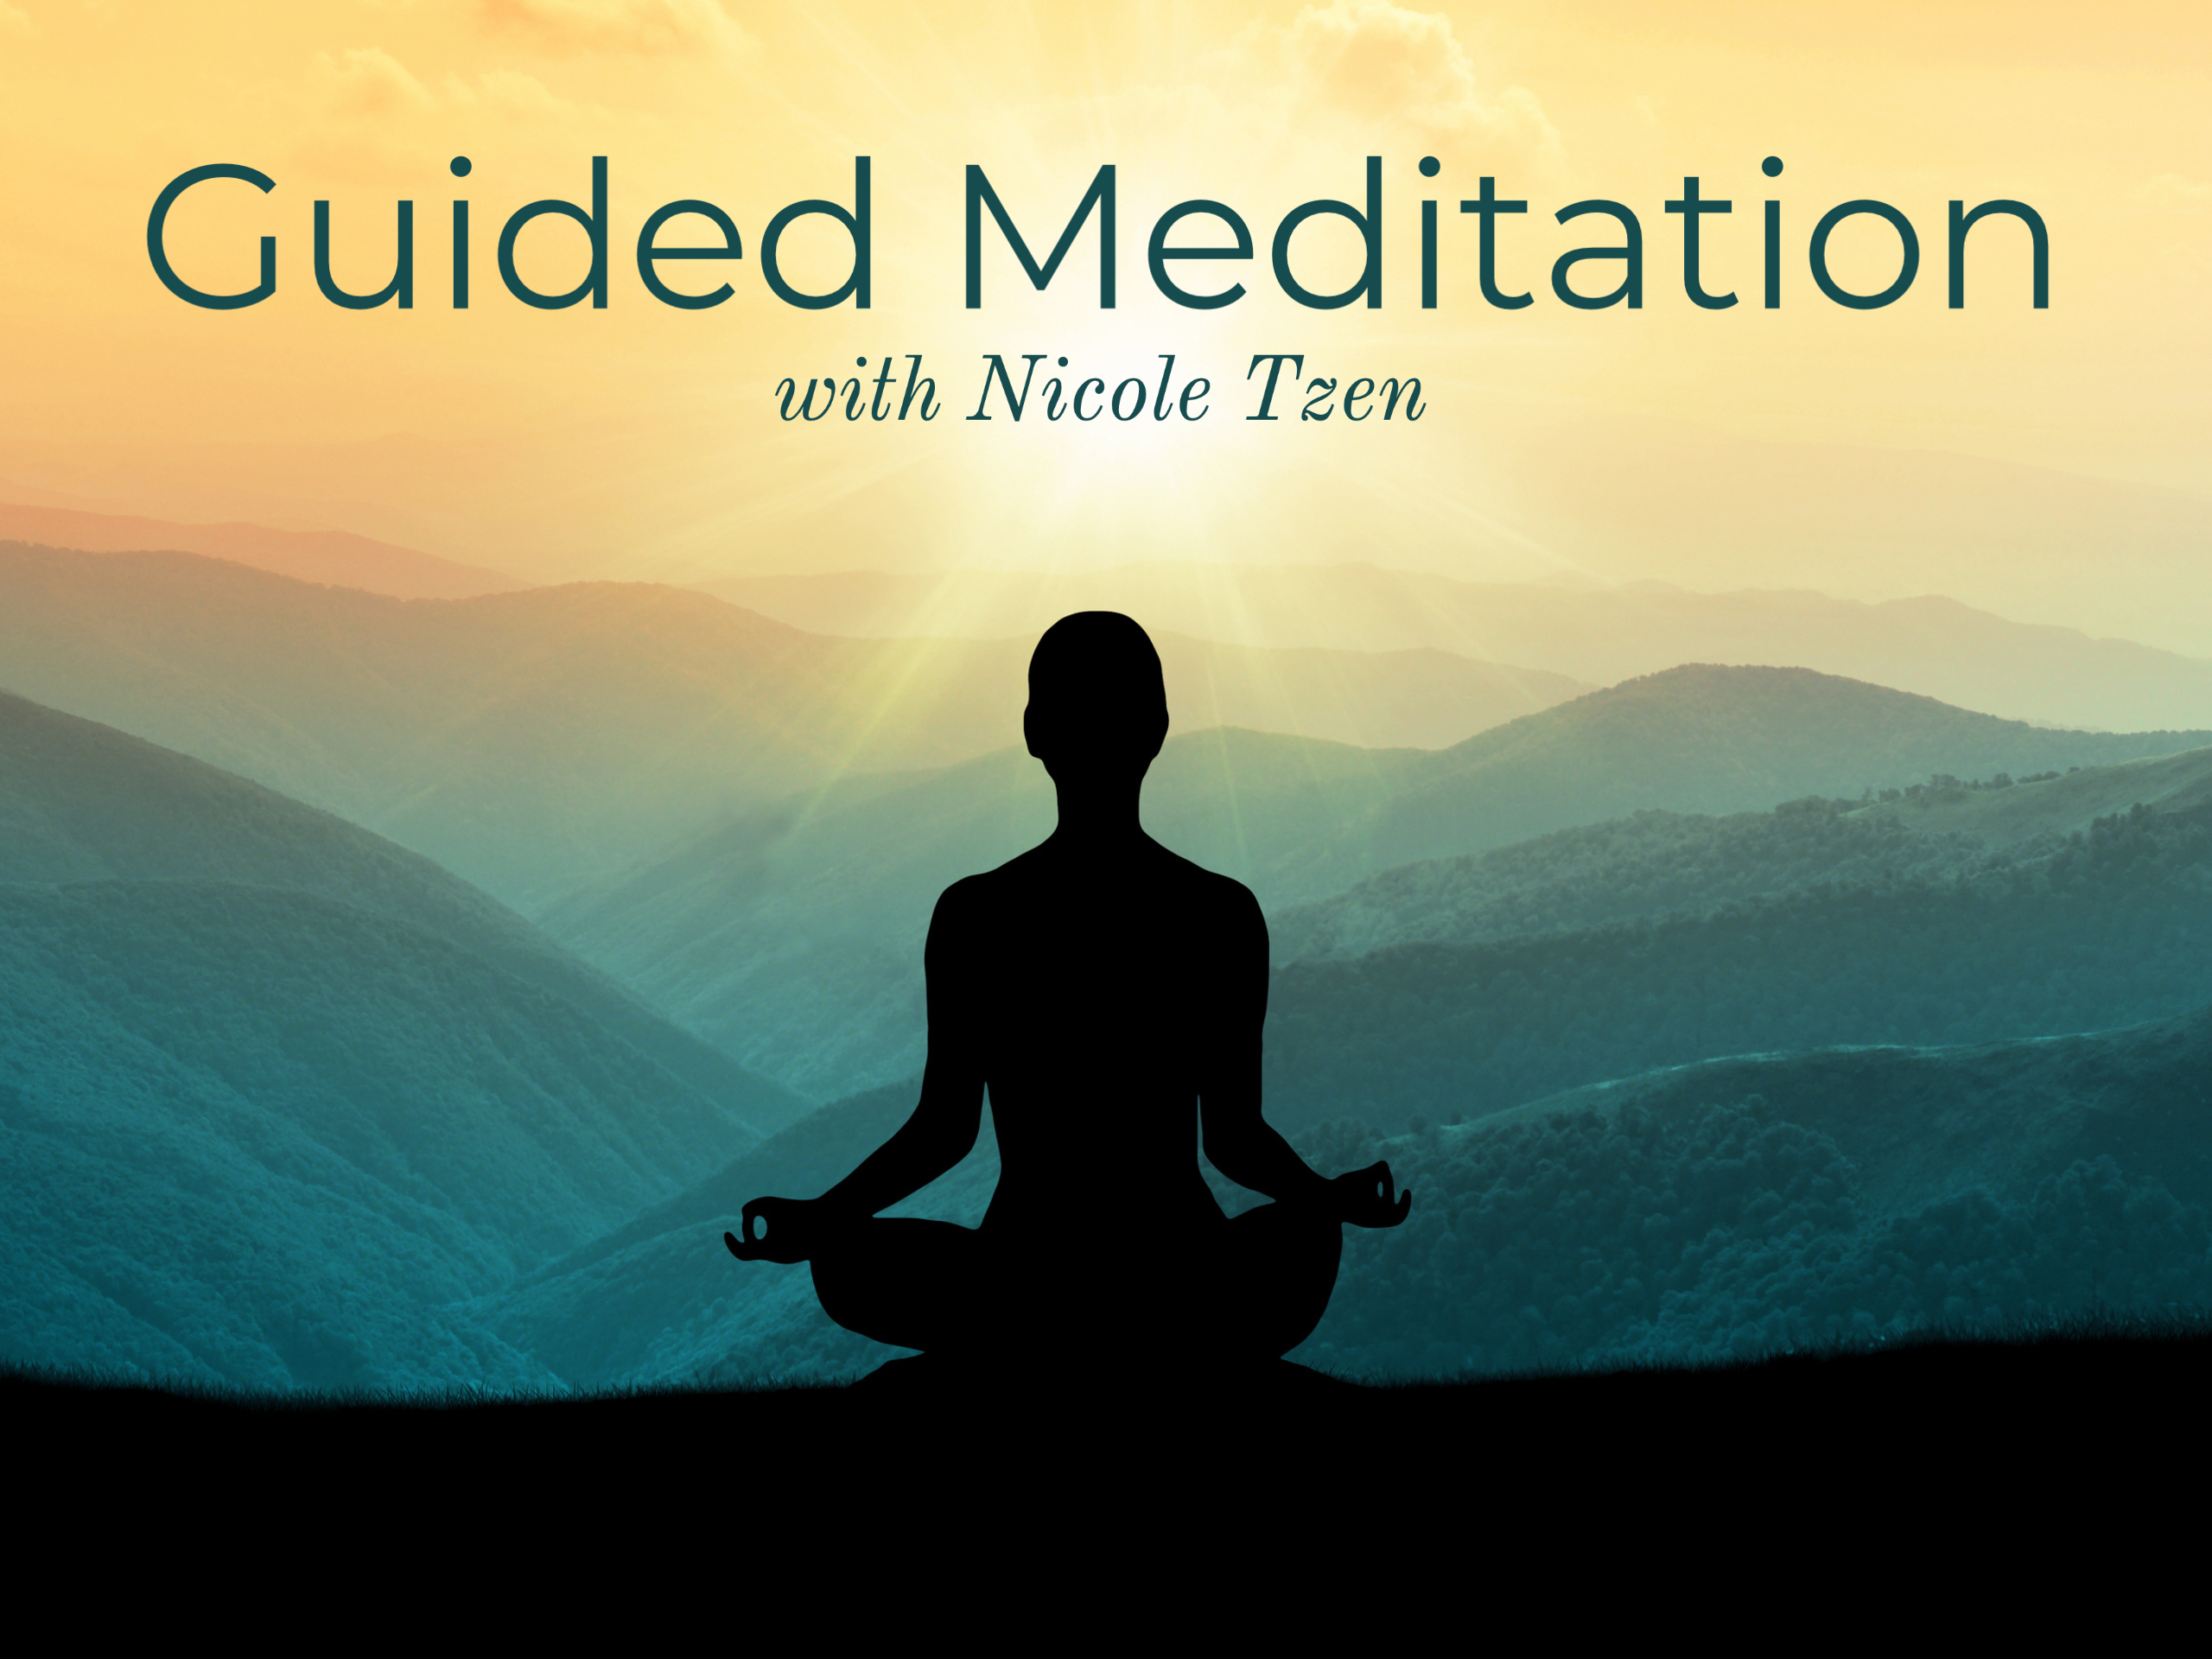 Guided Meditation at The Spa - East Wind Long Island